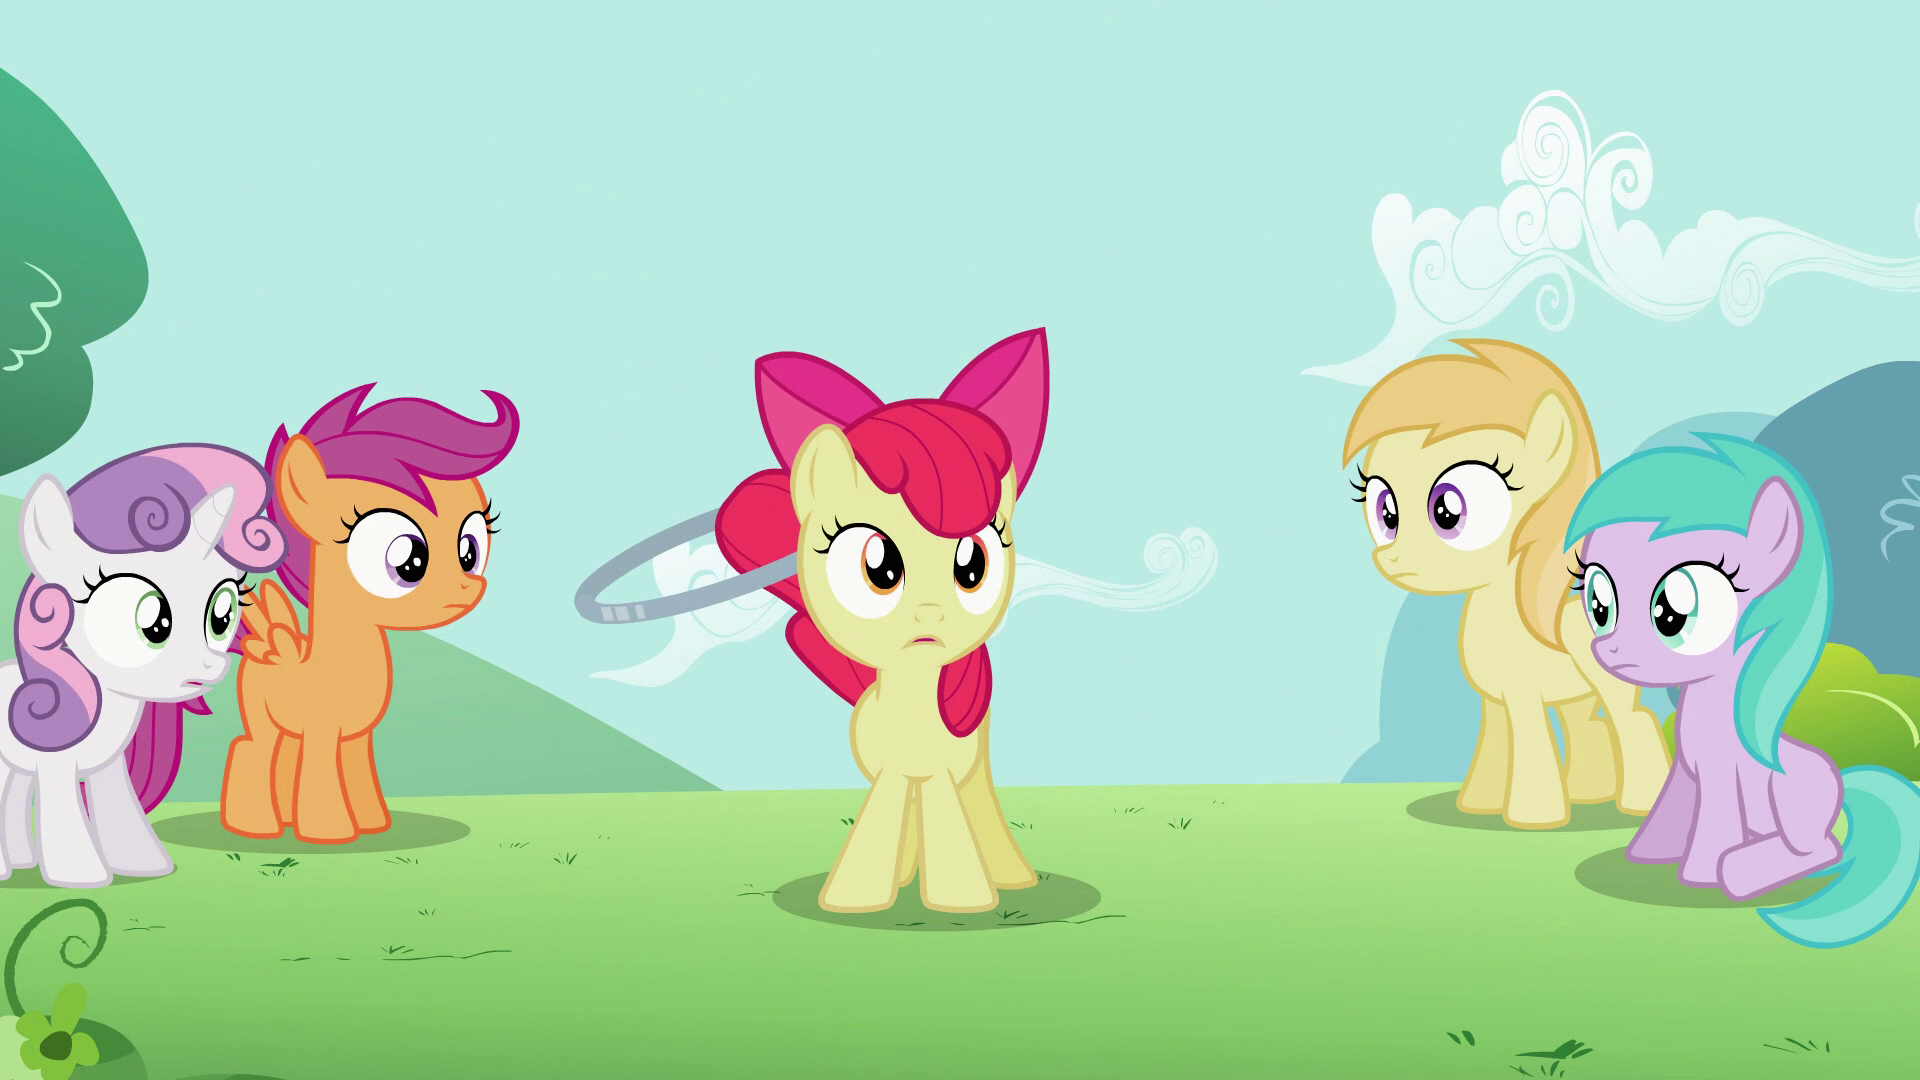 Noi images - My Little Pony Friendship is Magic Wiki